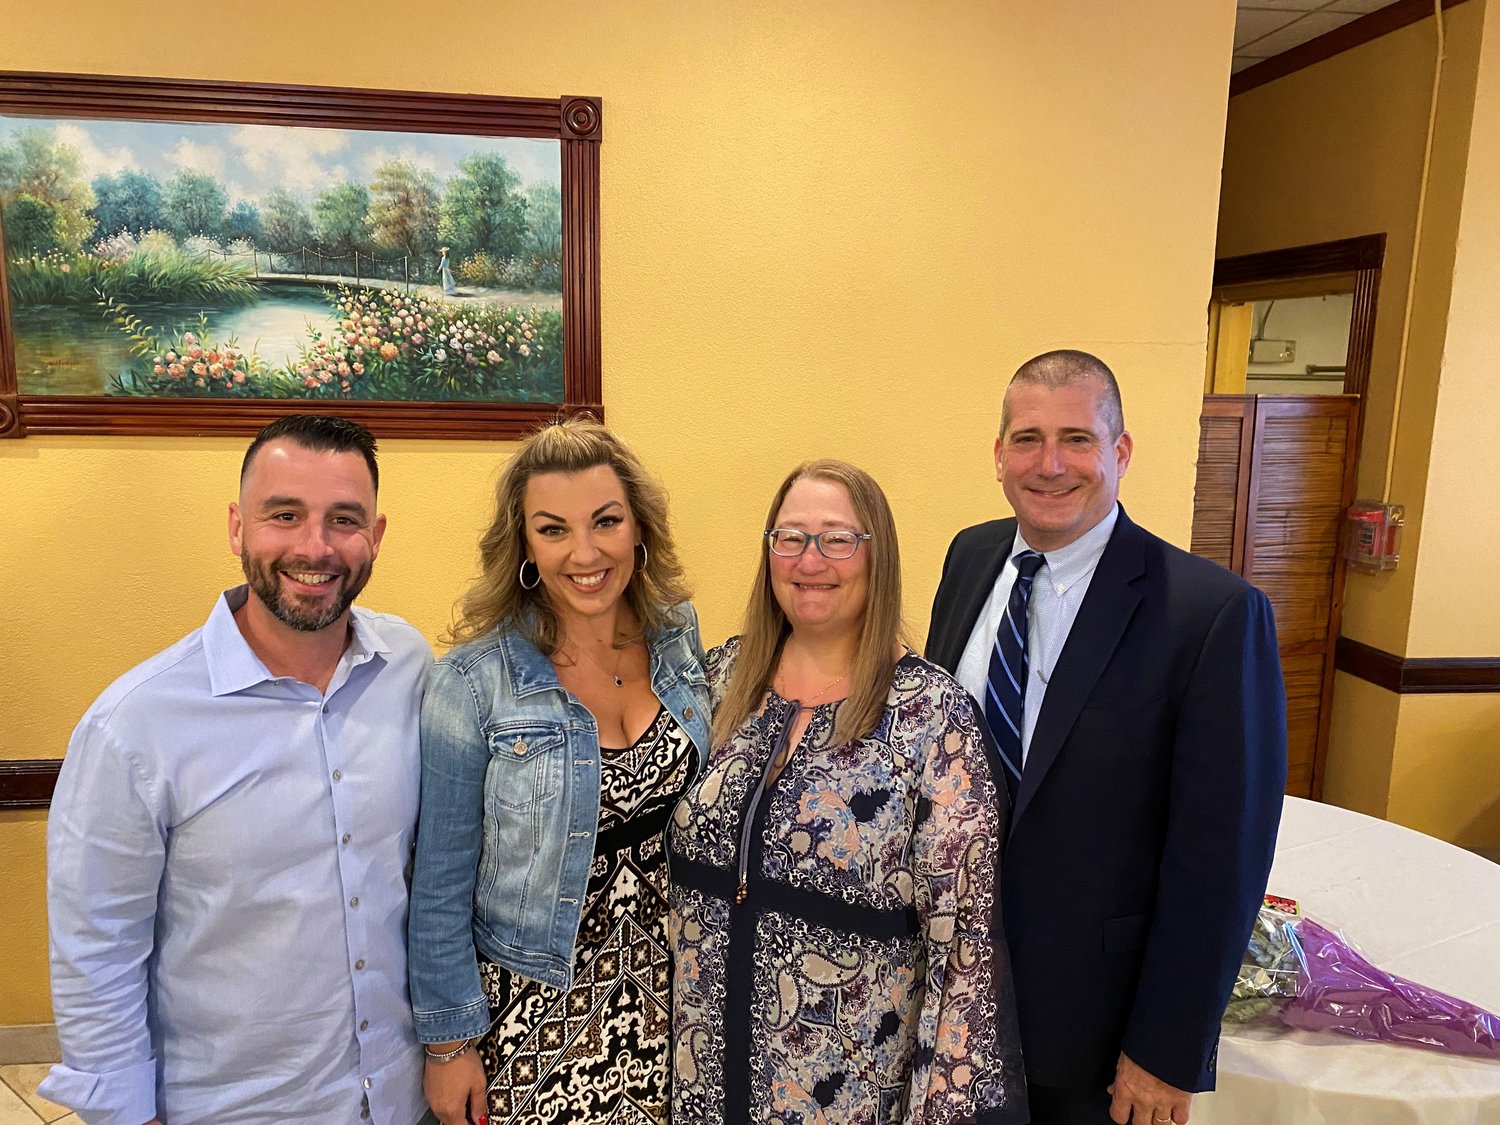 Levittown Superintendent Dr. Tonie McDonald, second from right, taught husband and wife John Gallina, left, and Susanne Gallina. Todd Winch, far right, is succeeding McDonald. The Gallinas, Division Avenue High class of 1998, and have children attending Levittown schools.